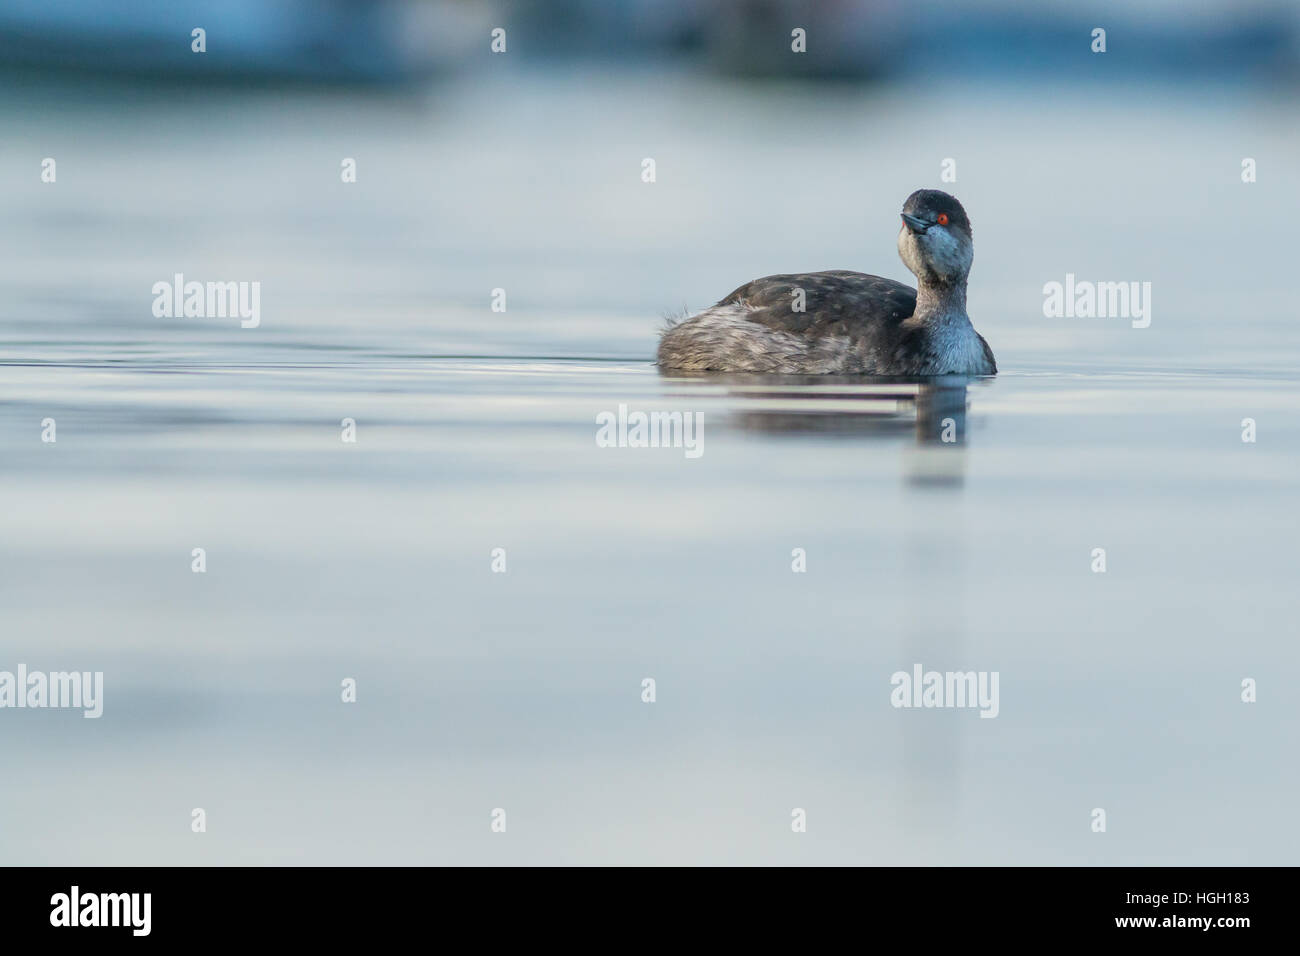 Black-necked grebe Podiceps nigricollis, water level images of a wintering individual in St Mary's Harbour, Isles of Scilly, October Stock Photo